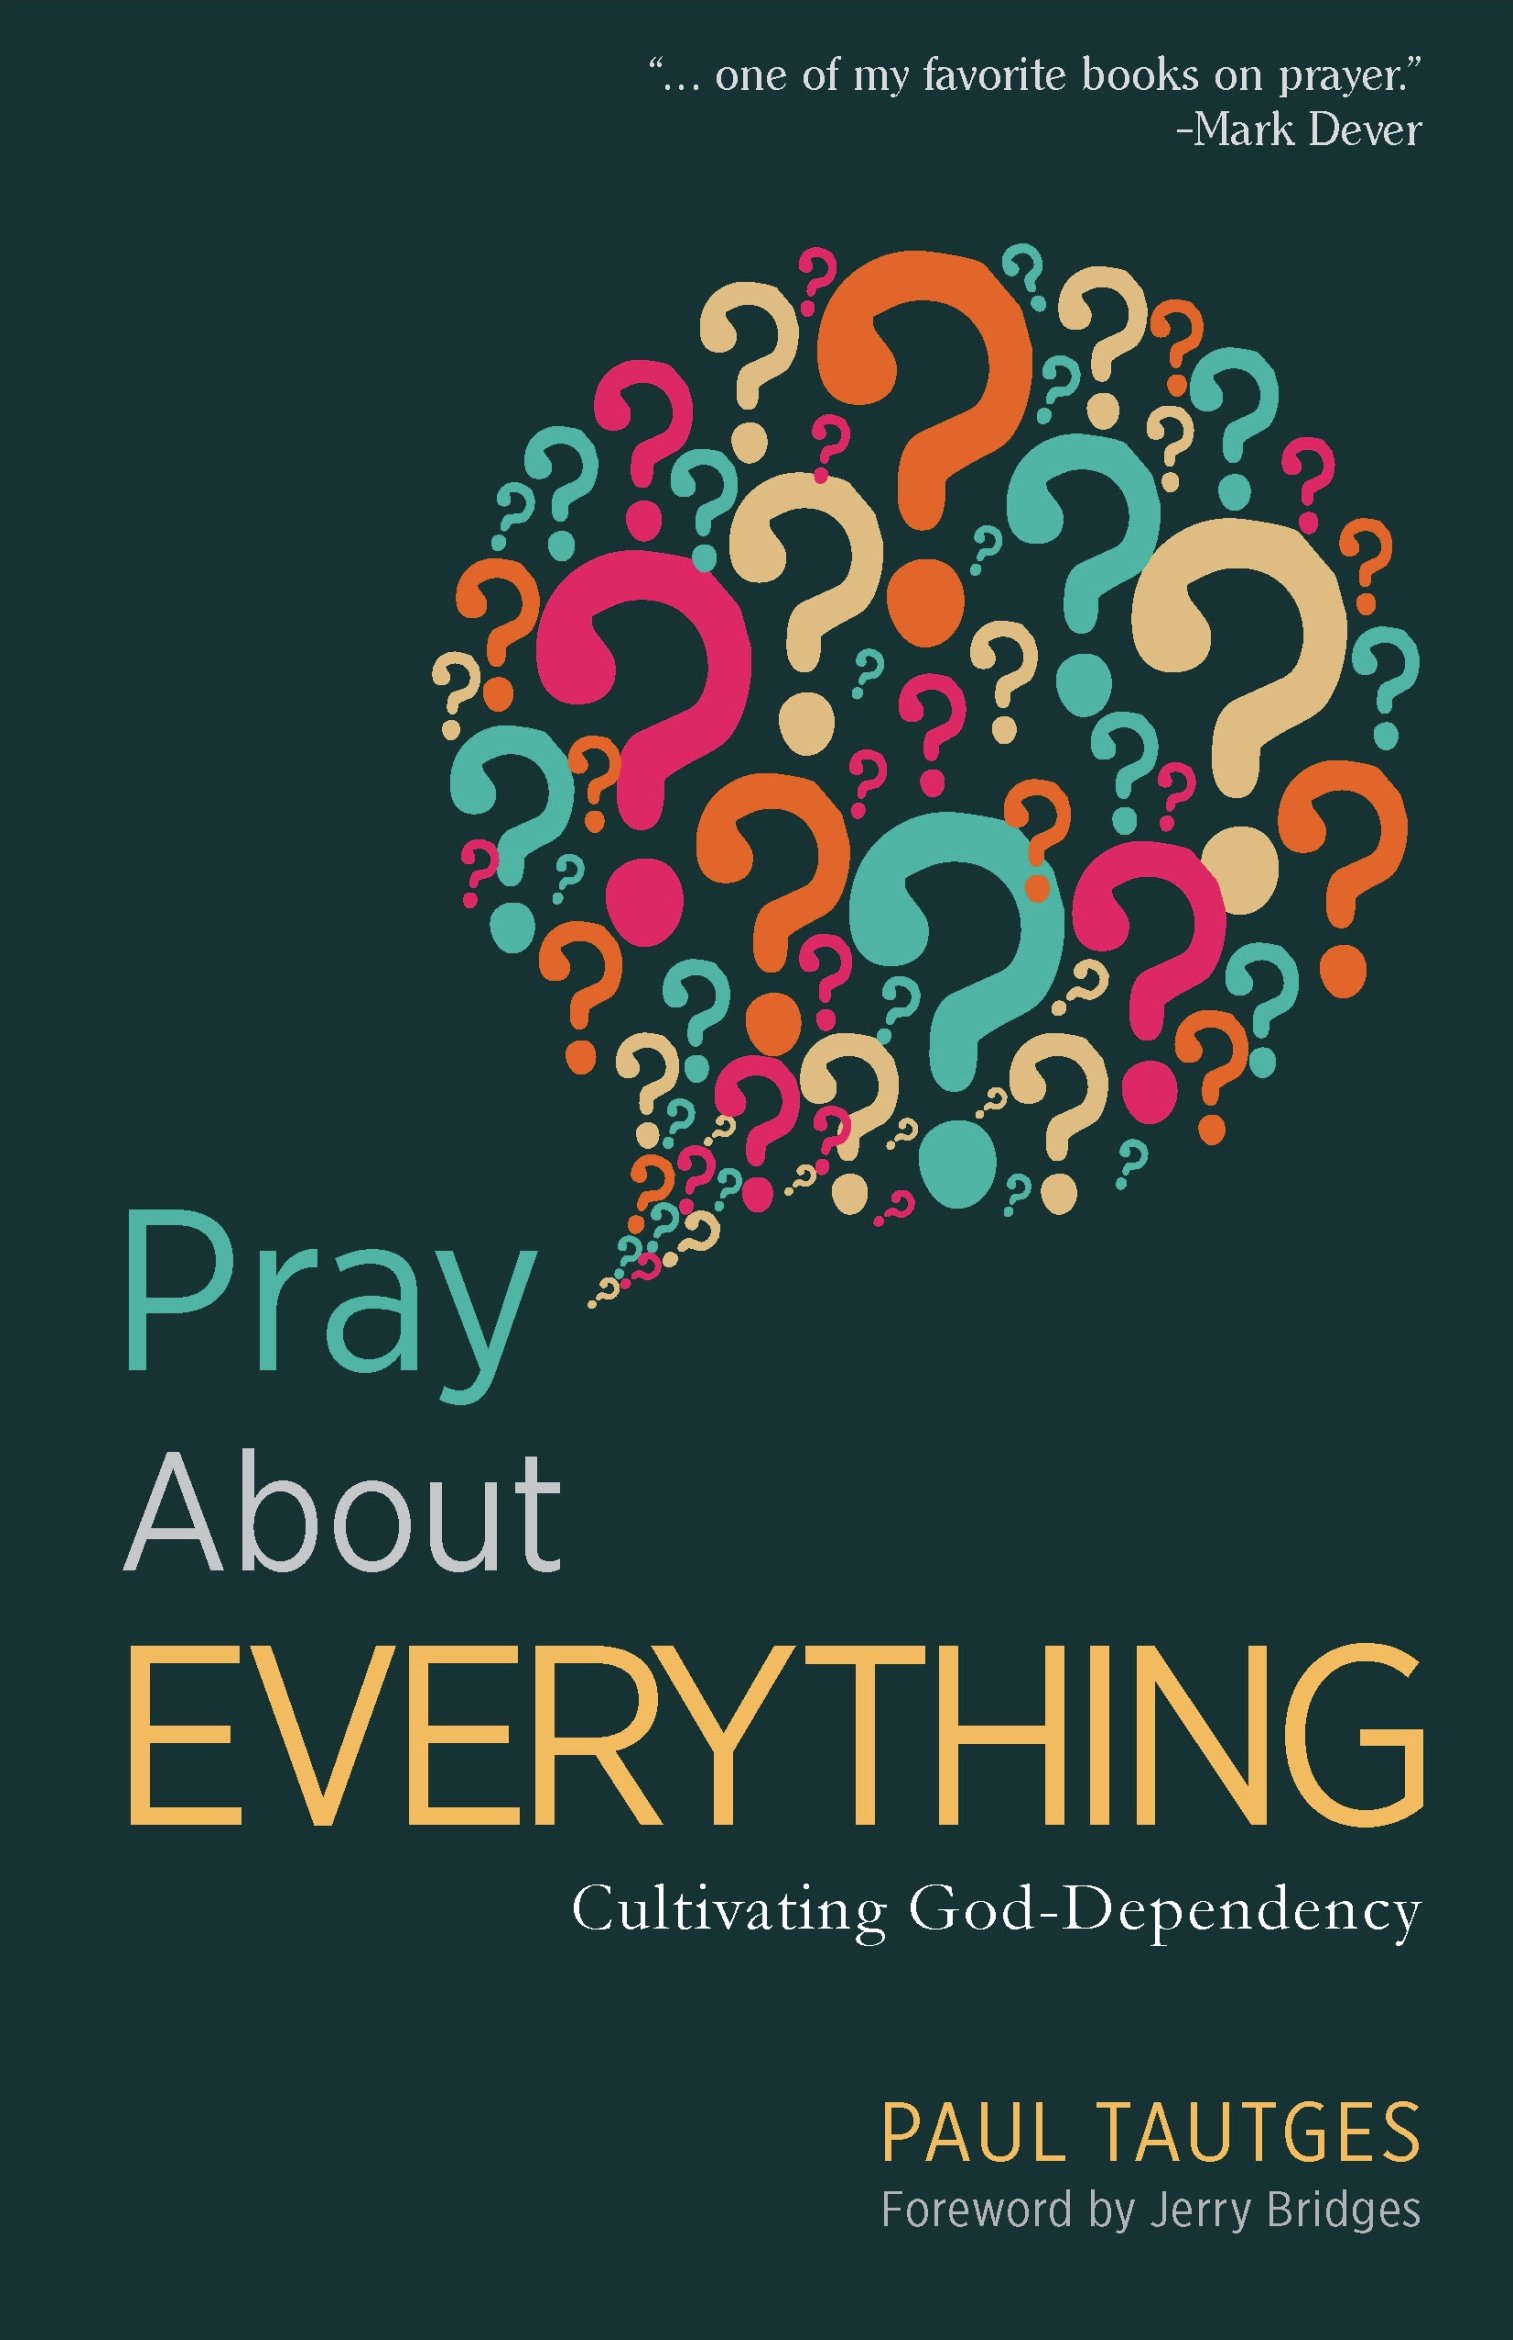 PRAY ABOUT EVERYTHING: CULTIVATING GOD-DEPENDENCY, by Paul Tautges